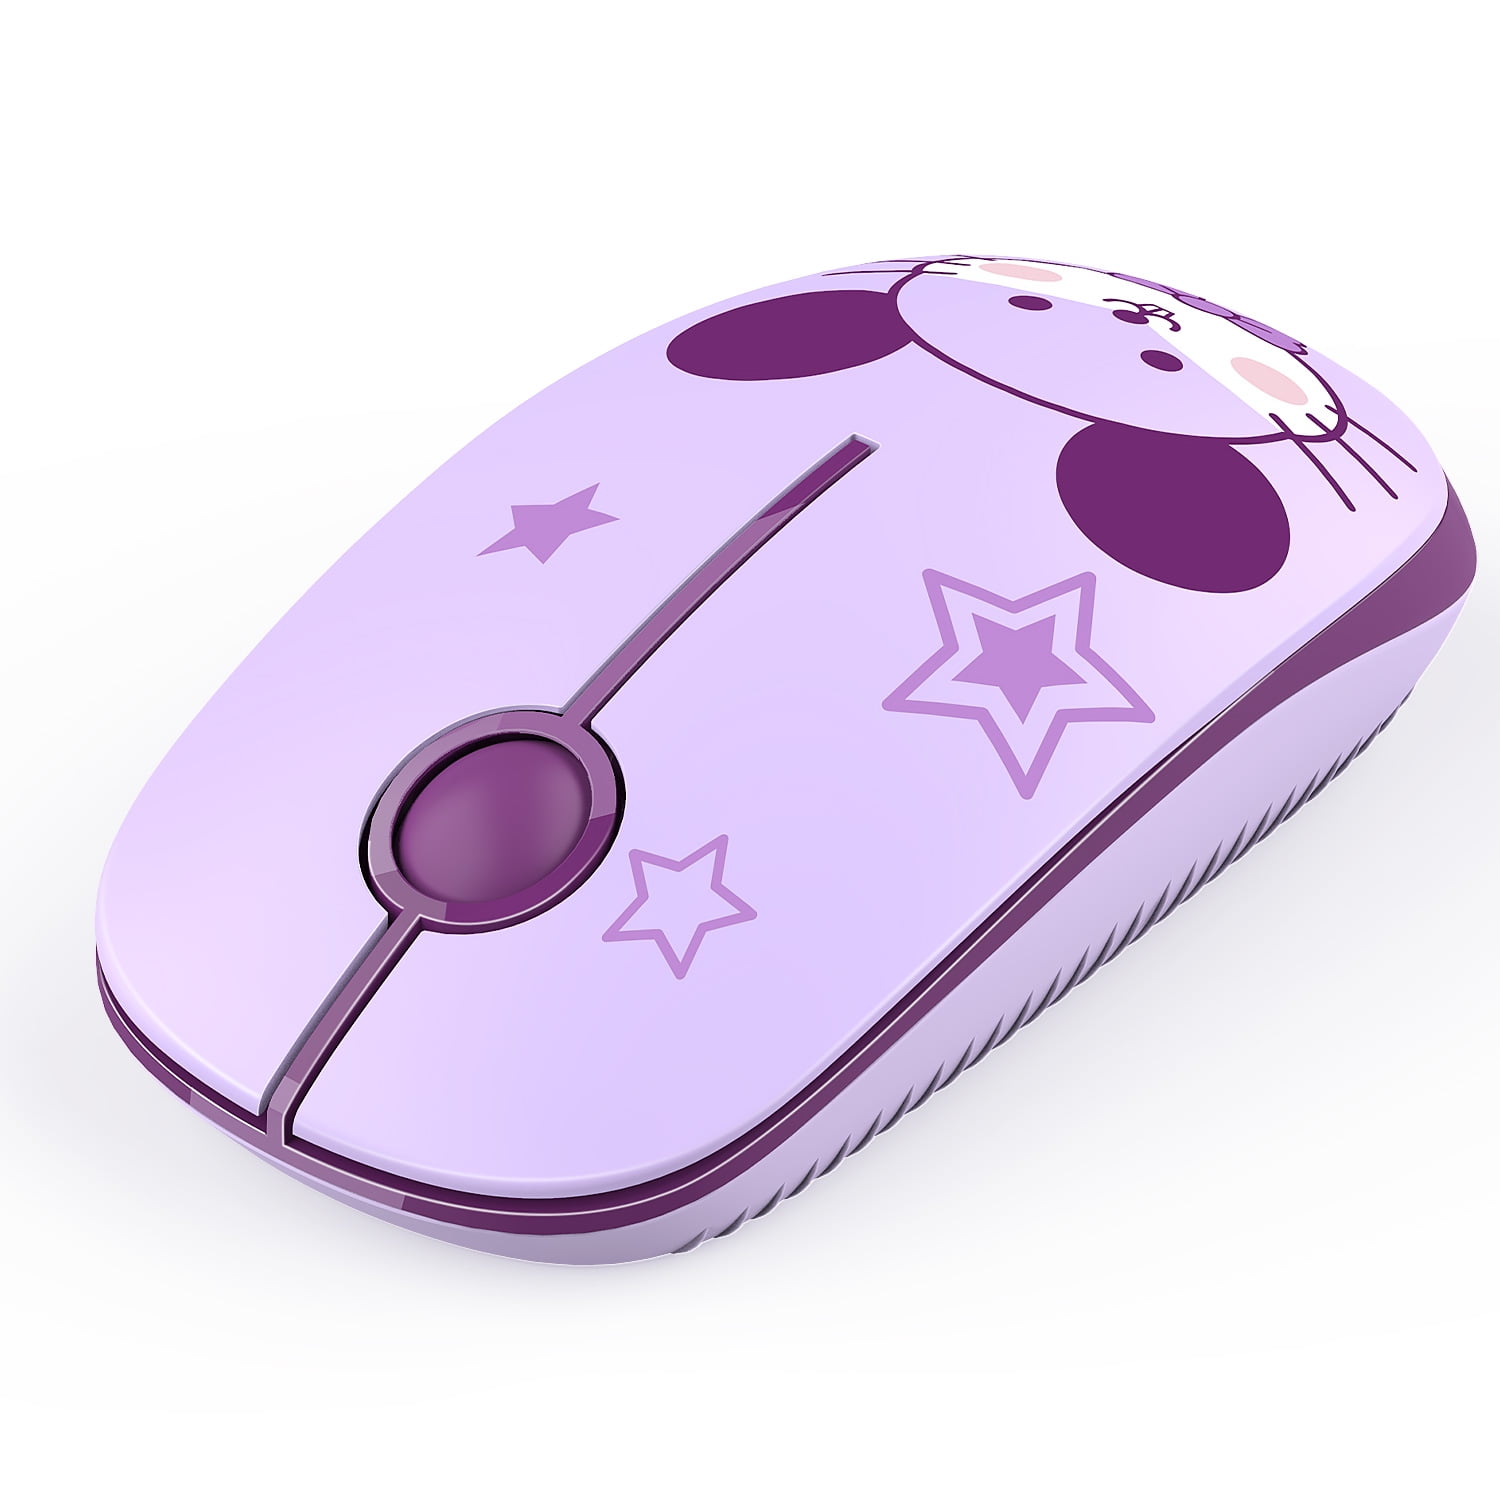 2.4G Wireless Mouse with Cute Pattern Design for All Laptops and Desktops with Nano Receiver Simple Merry Christmas Decoration